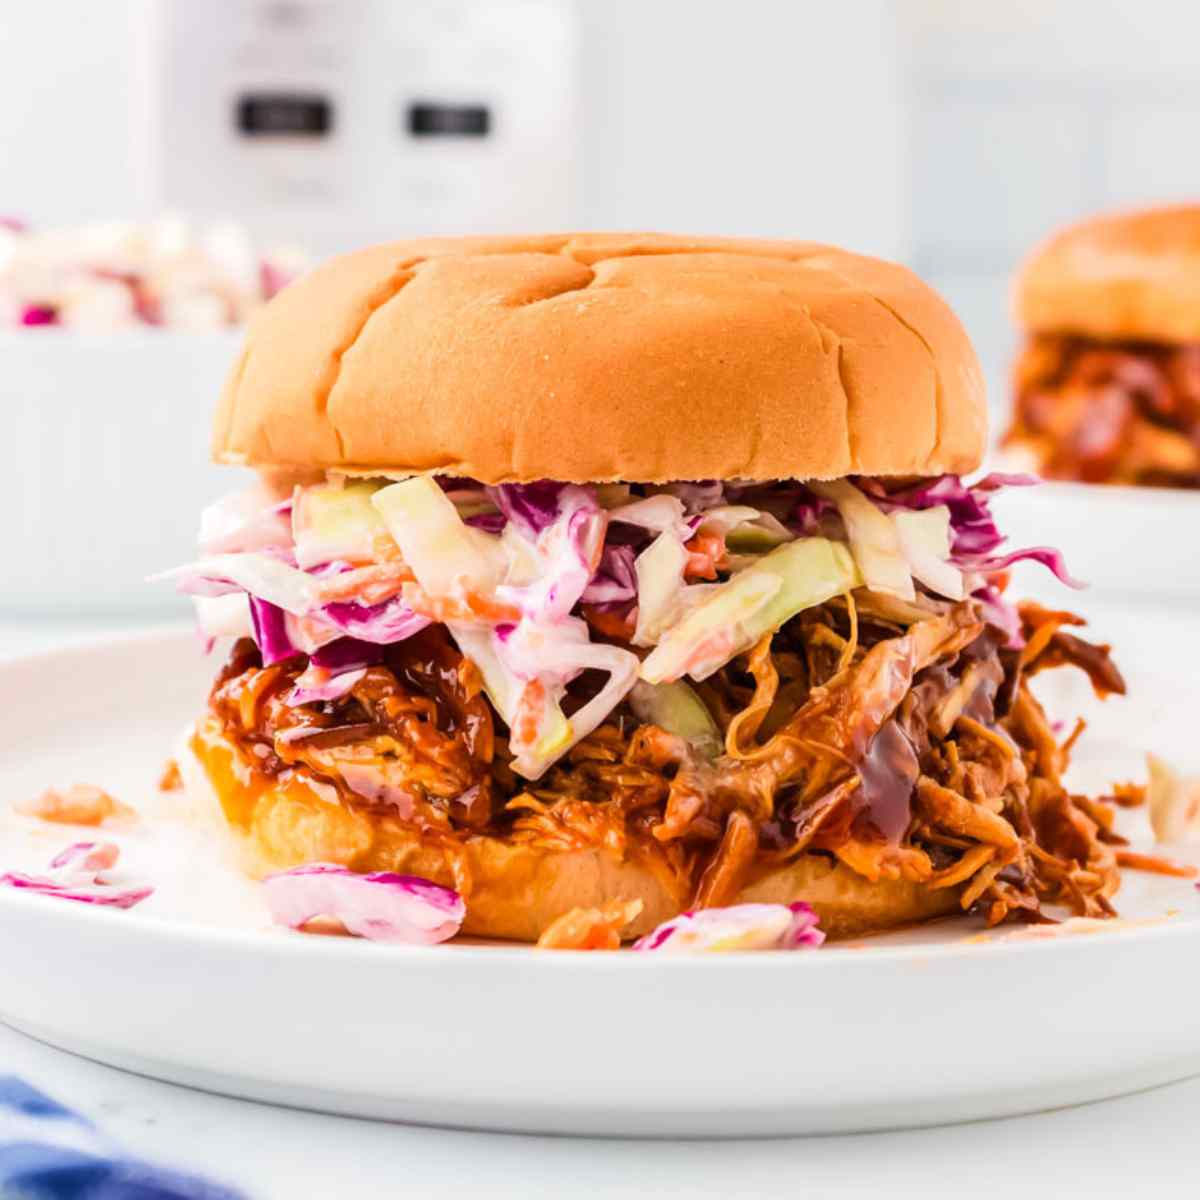 Crockpot bbq pulled chicken on a burger bun with cole slaw.